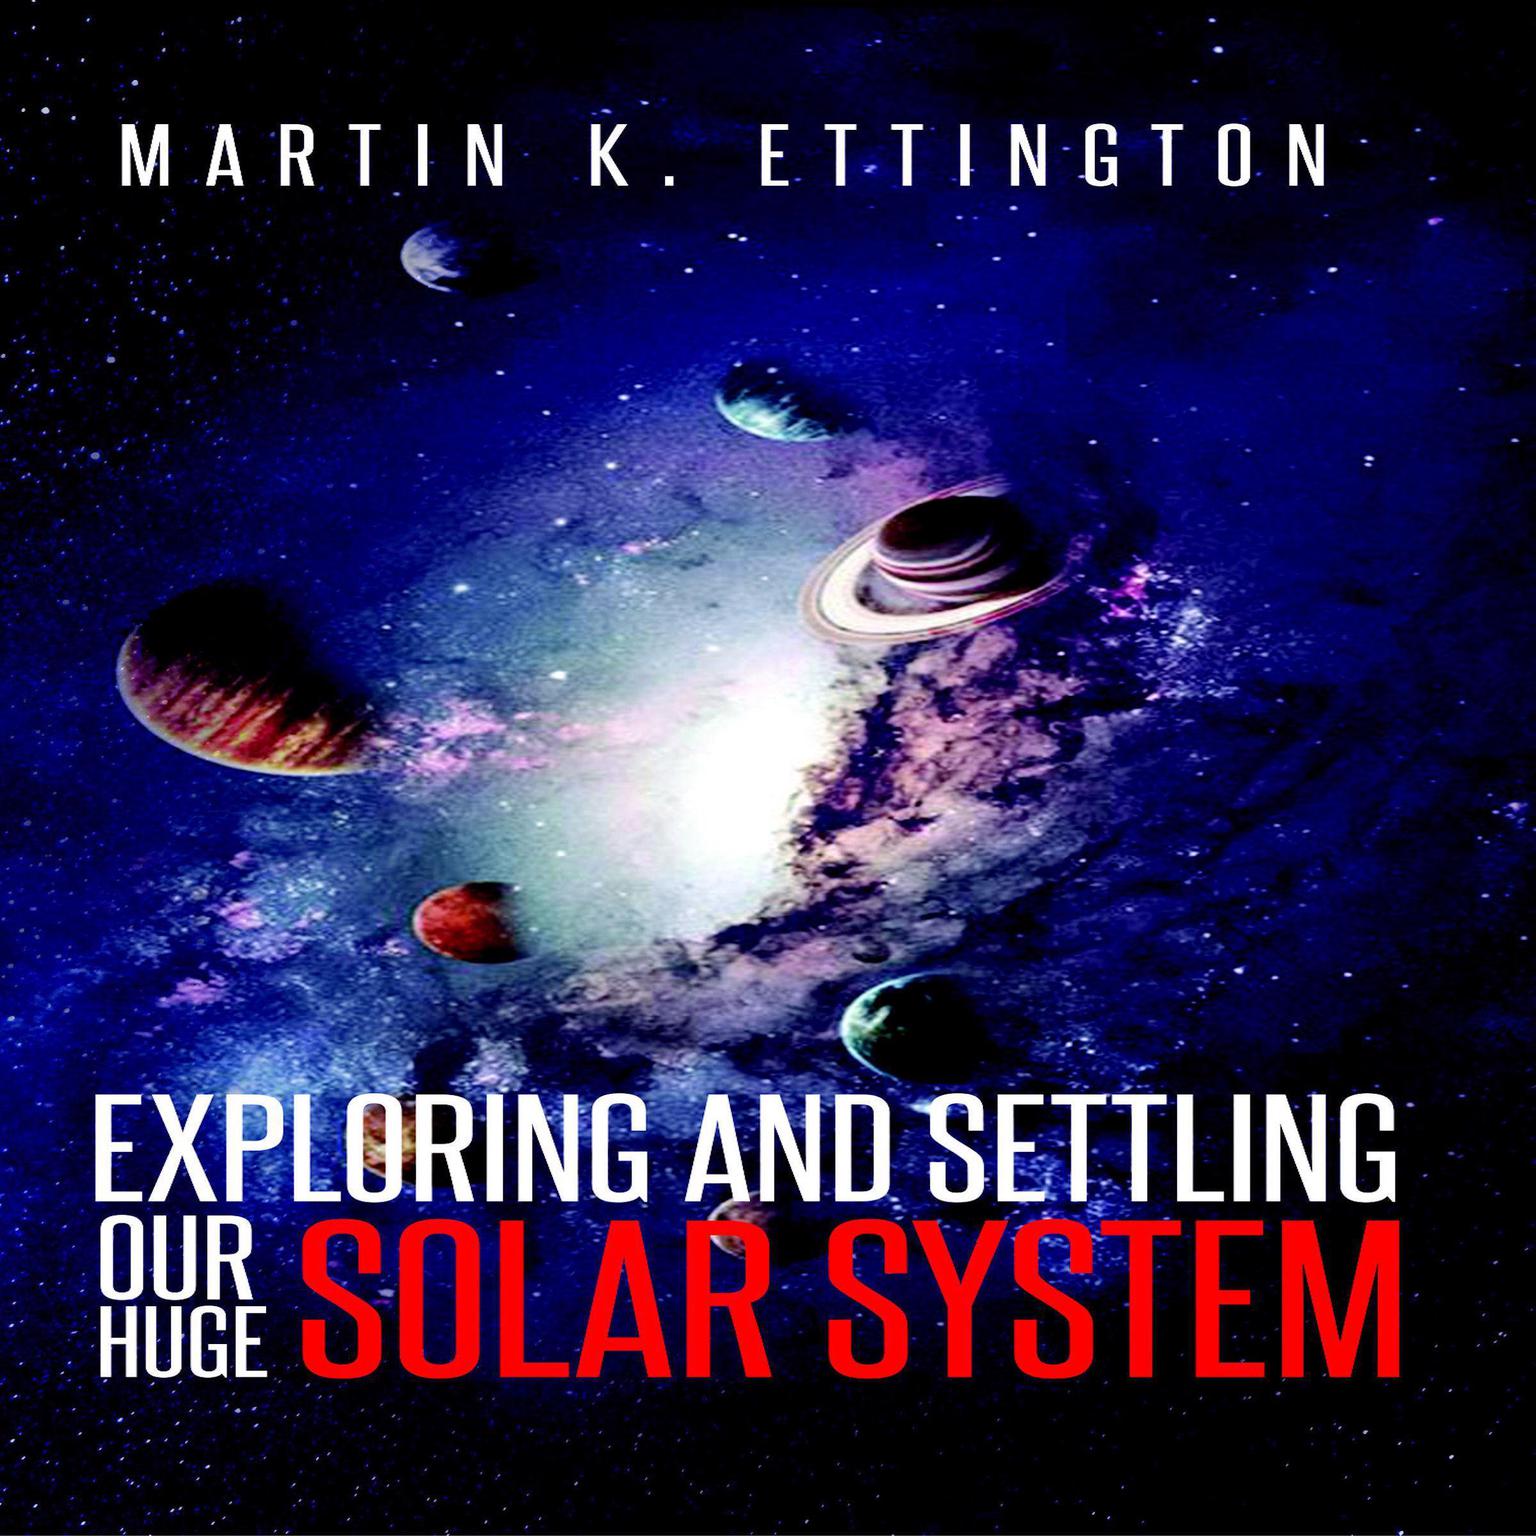 Exploring and Settling Our Huge Solar System Audiobook, by Martin K. Ettington